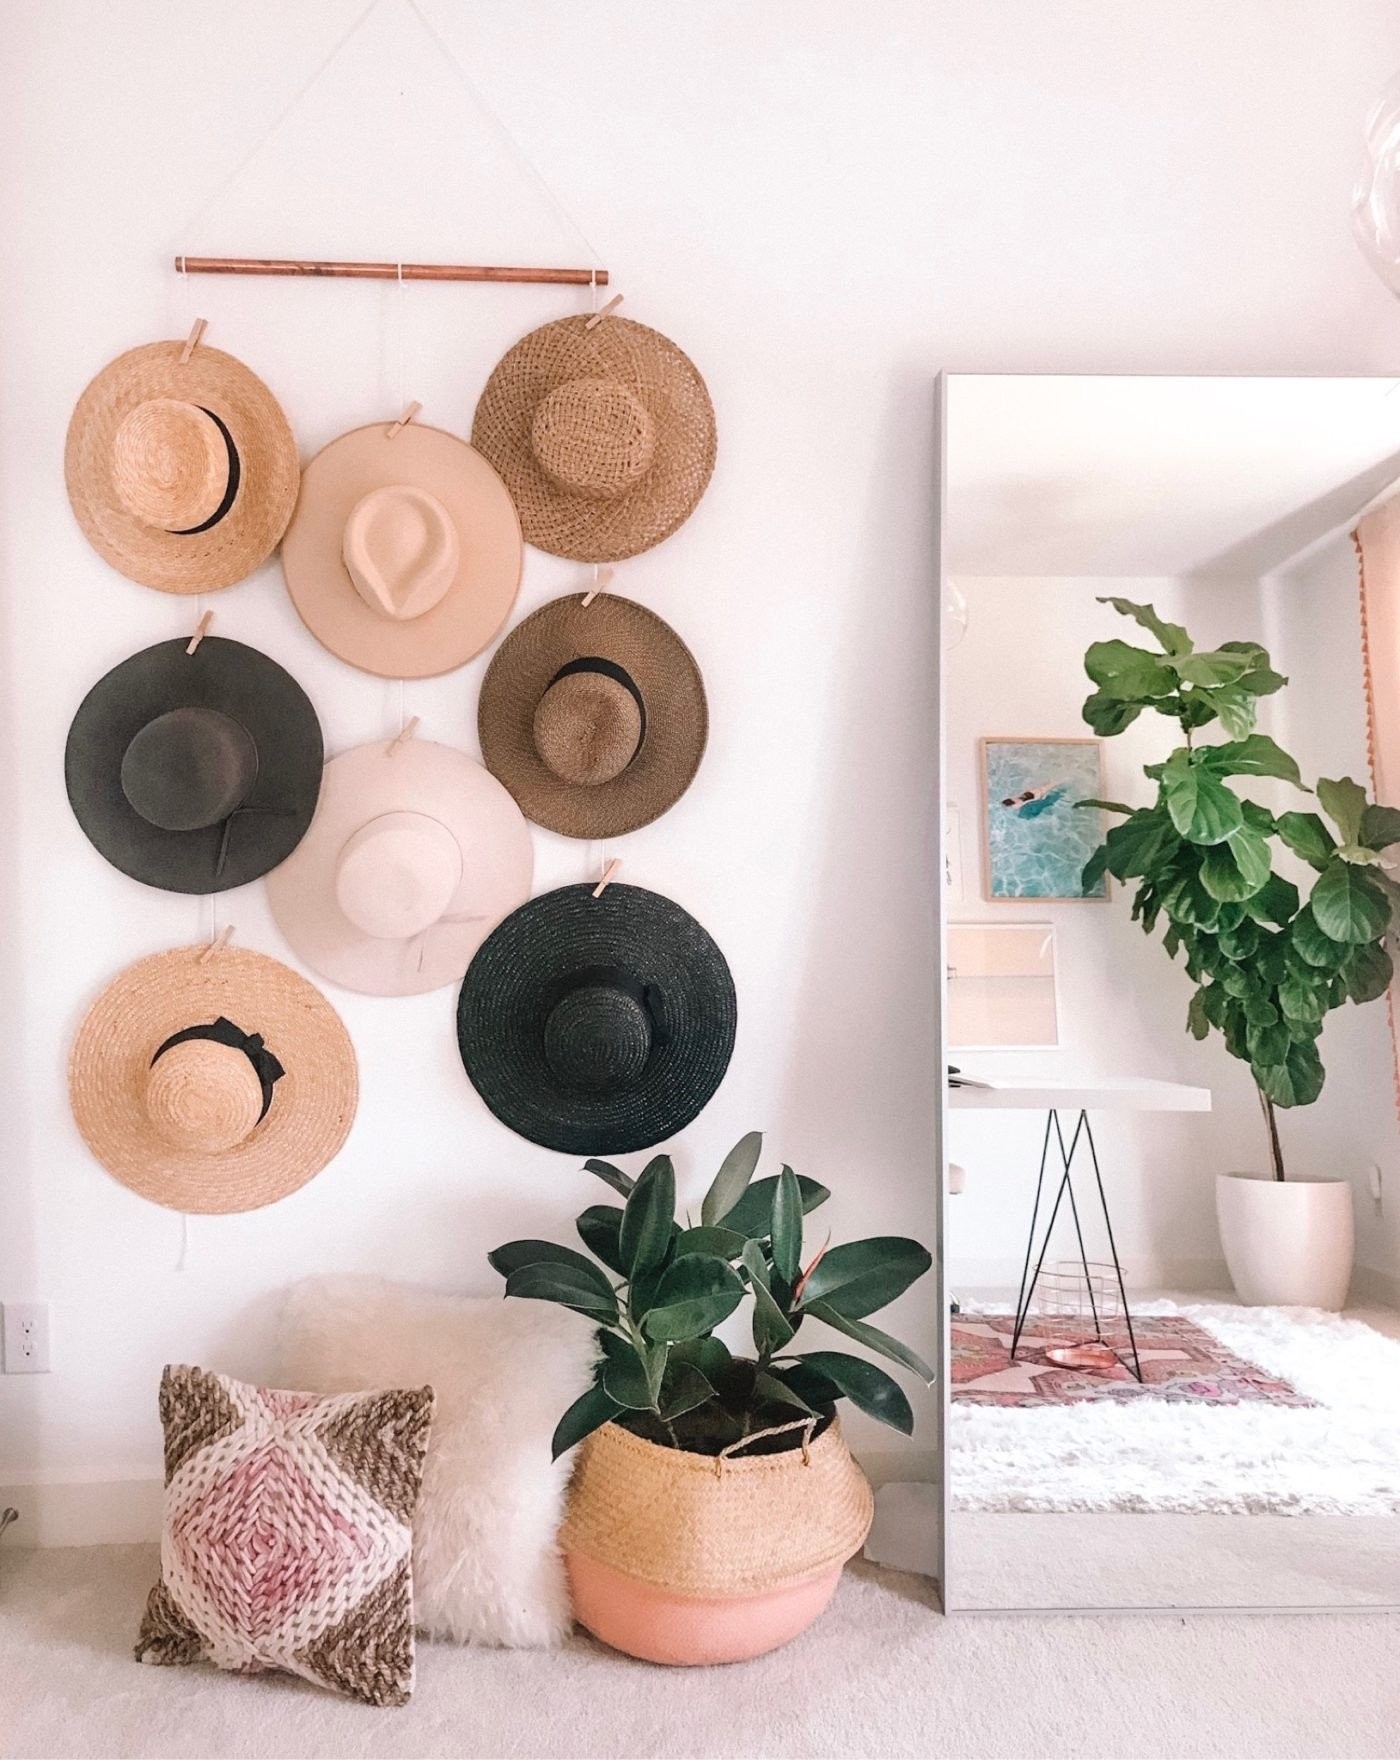 how-to-organazie-your-hats-hat-wall-display-diy-hat-rack-1400x1760.jpg